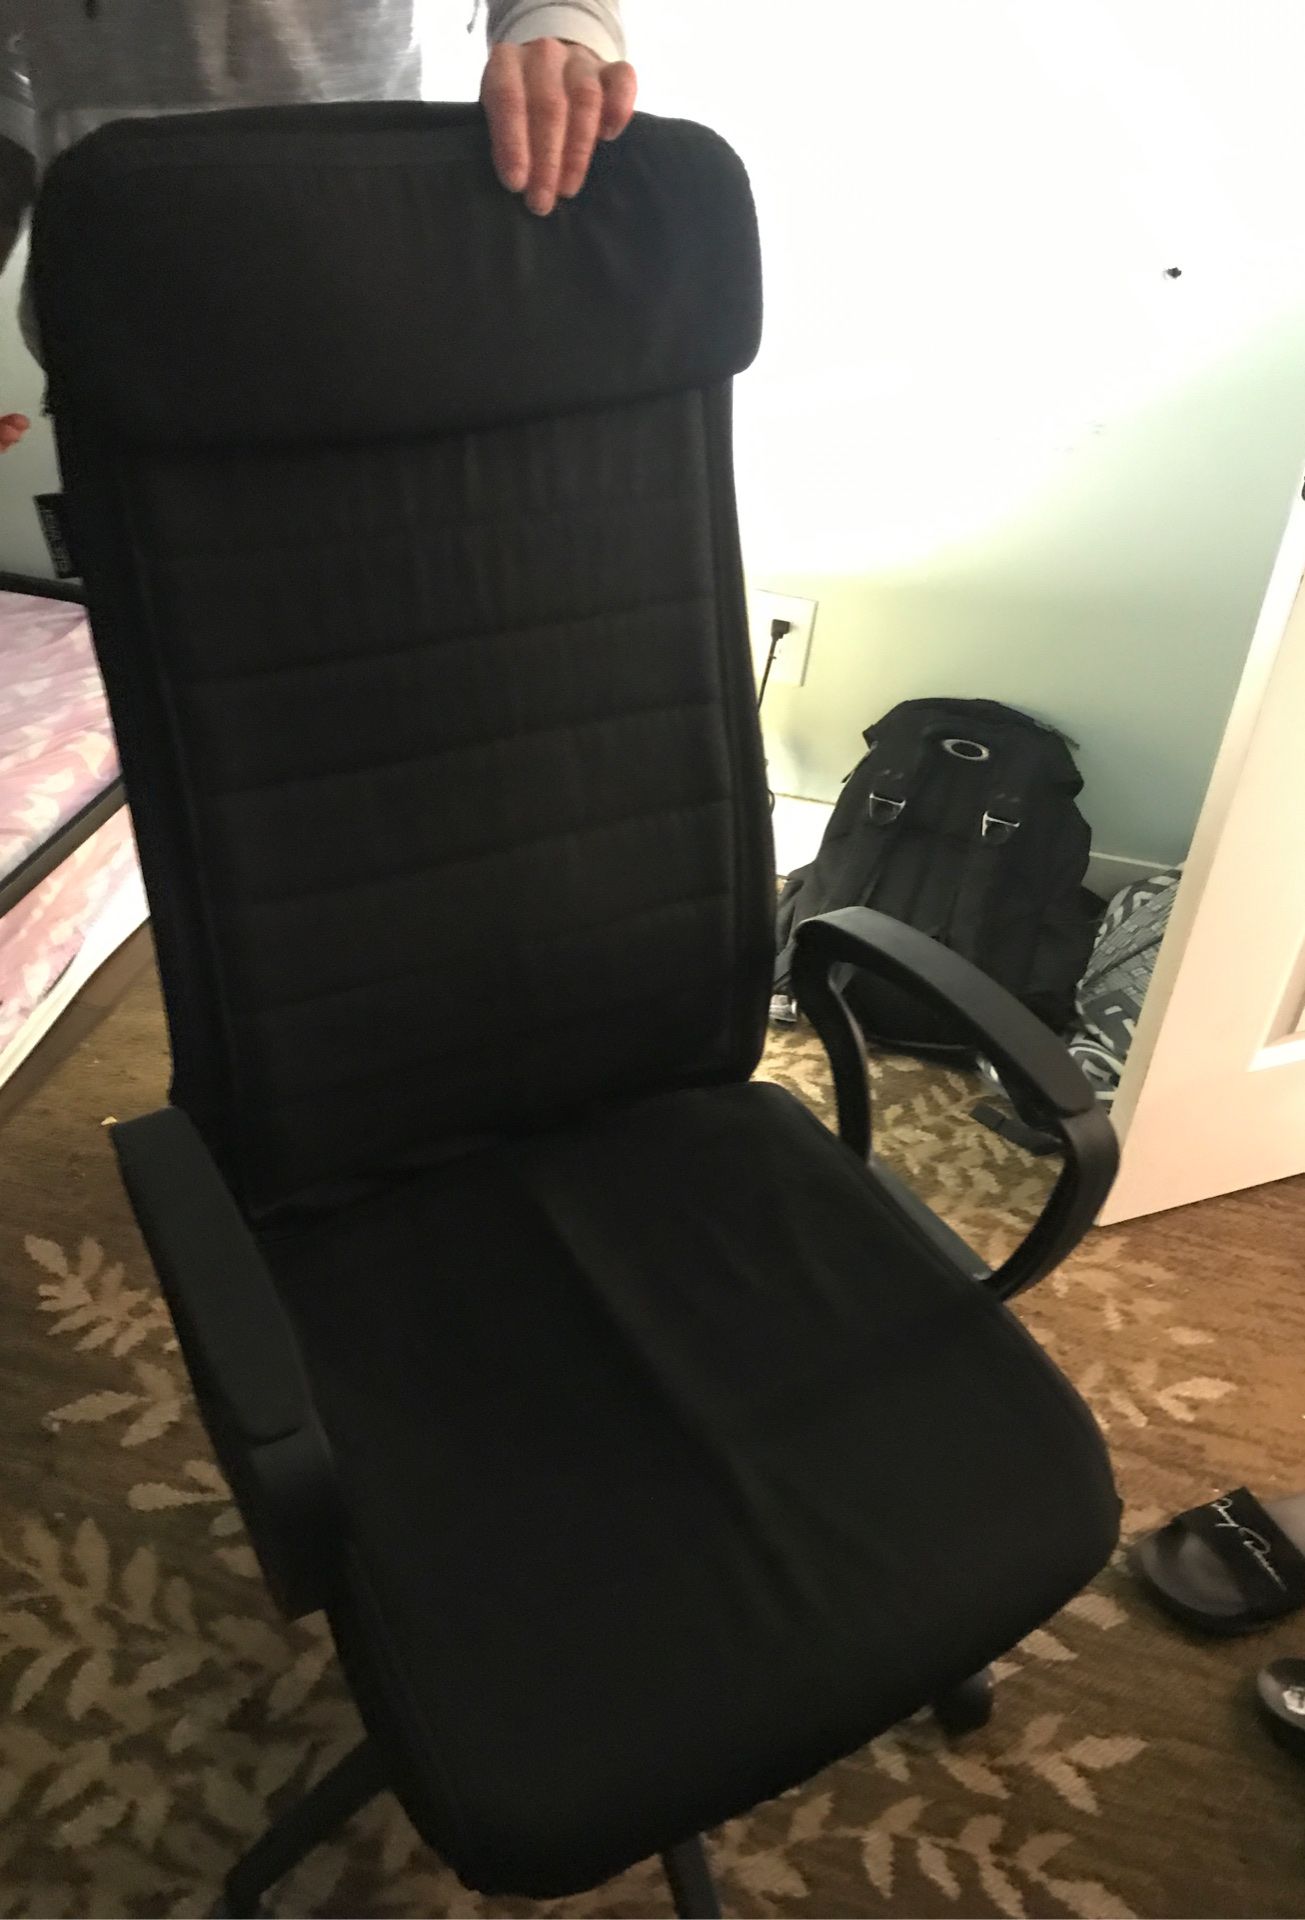 Elecwish office chair ( used for gaming and other office purposes)